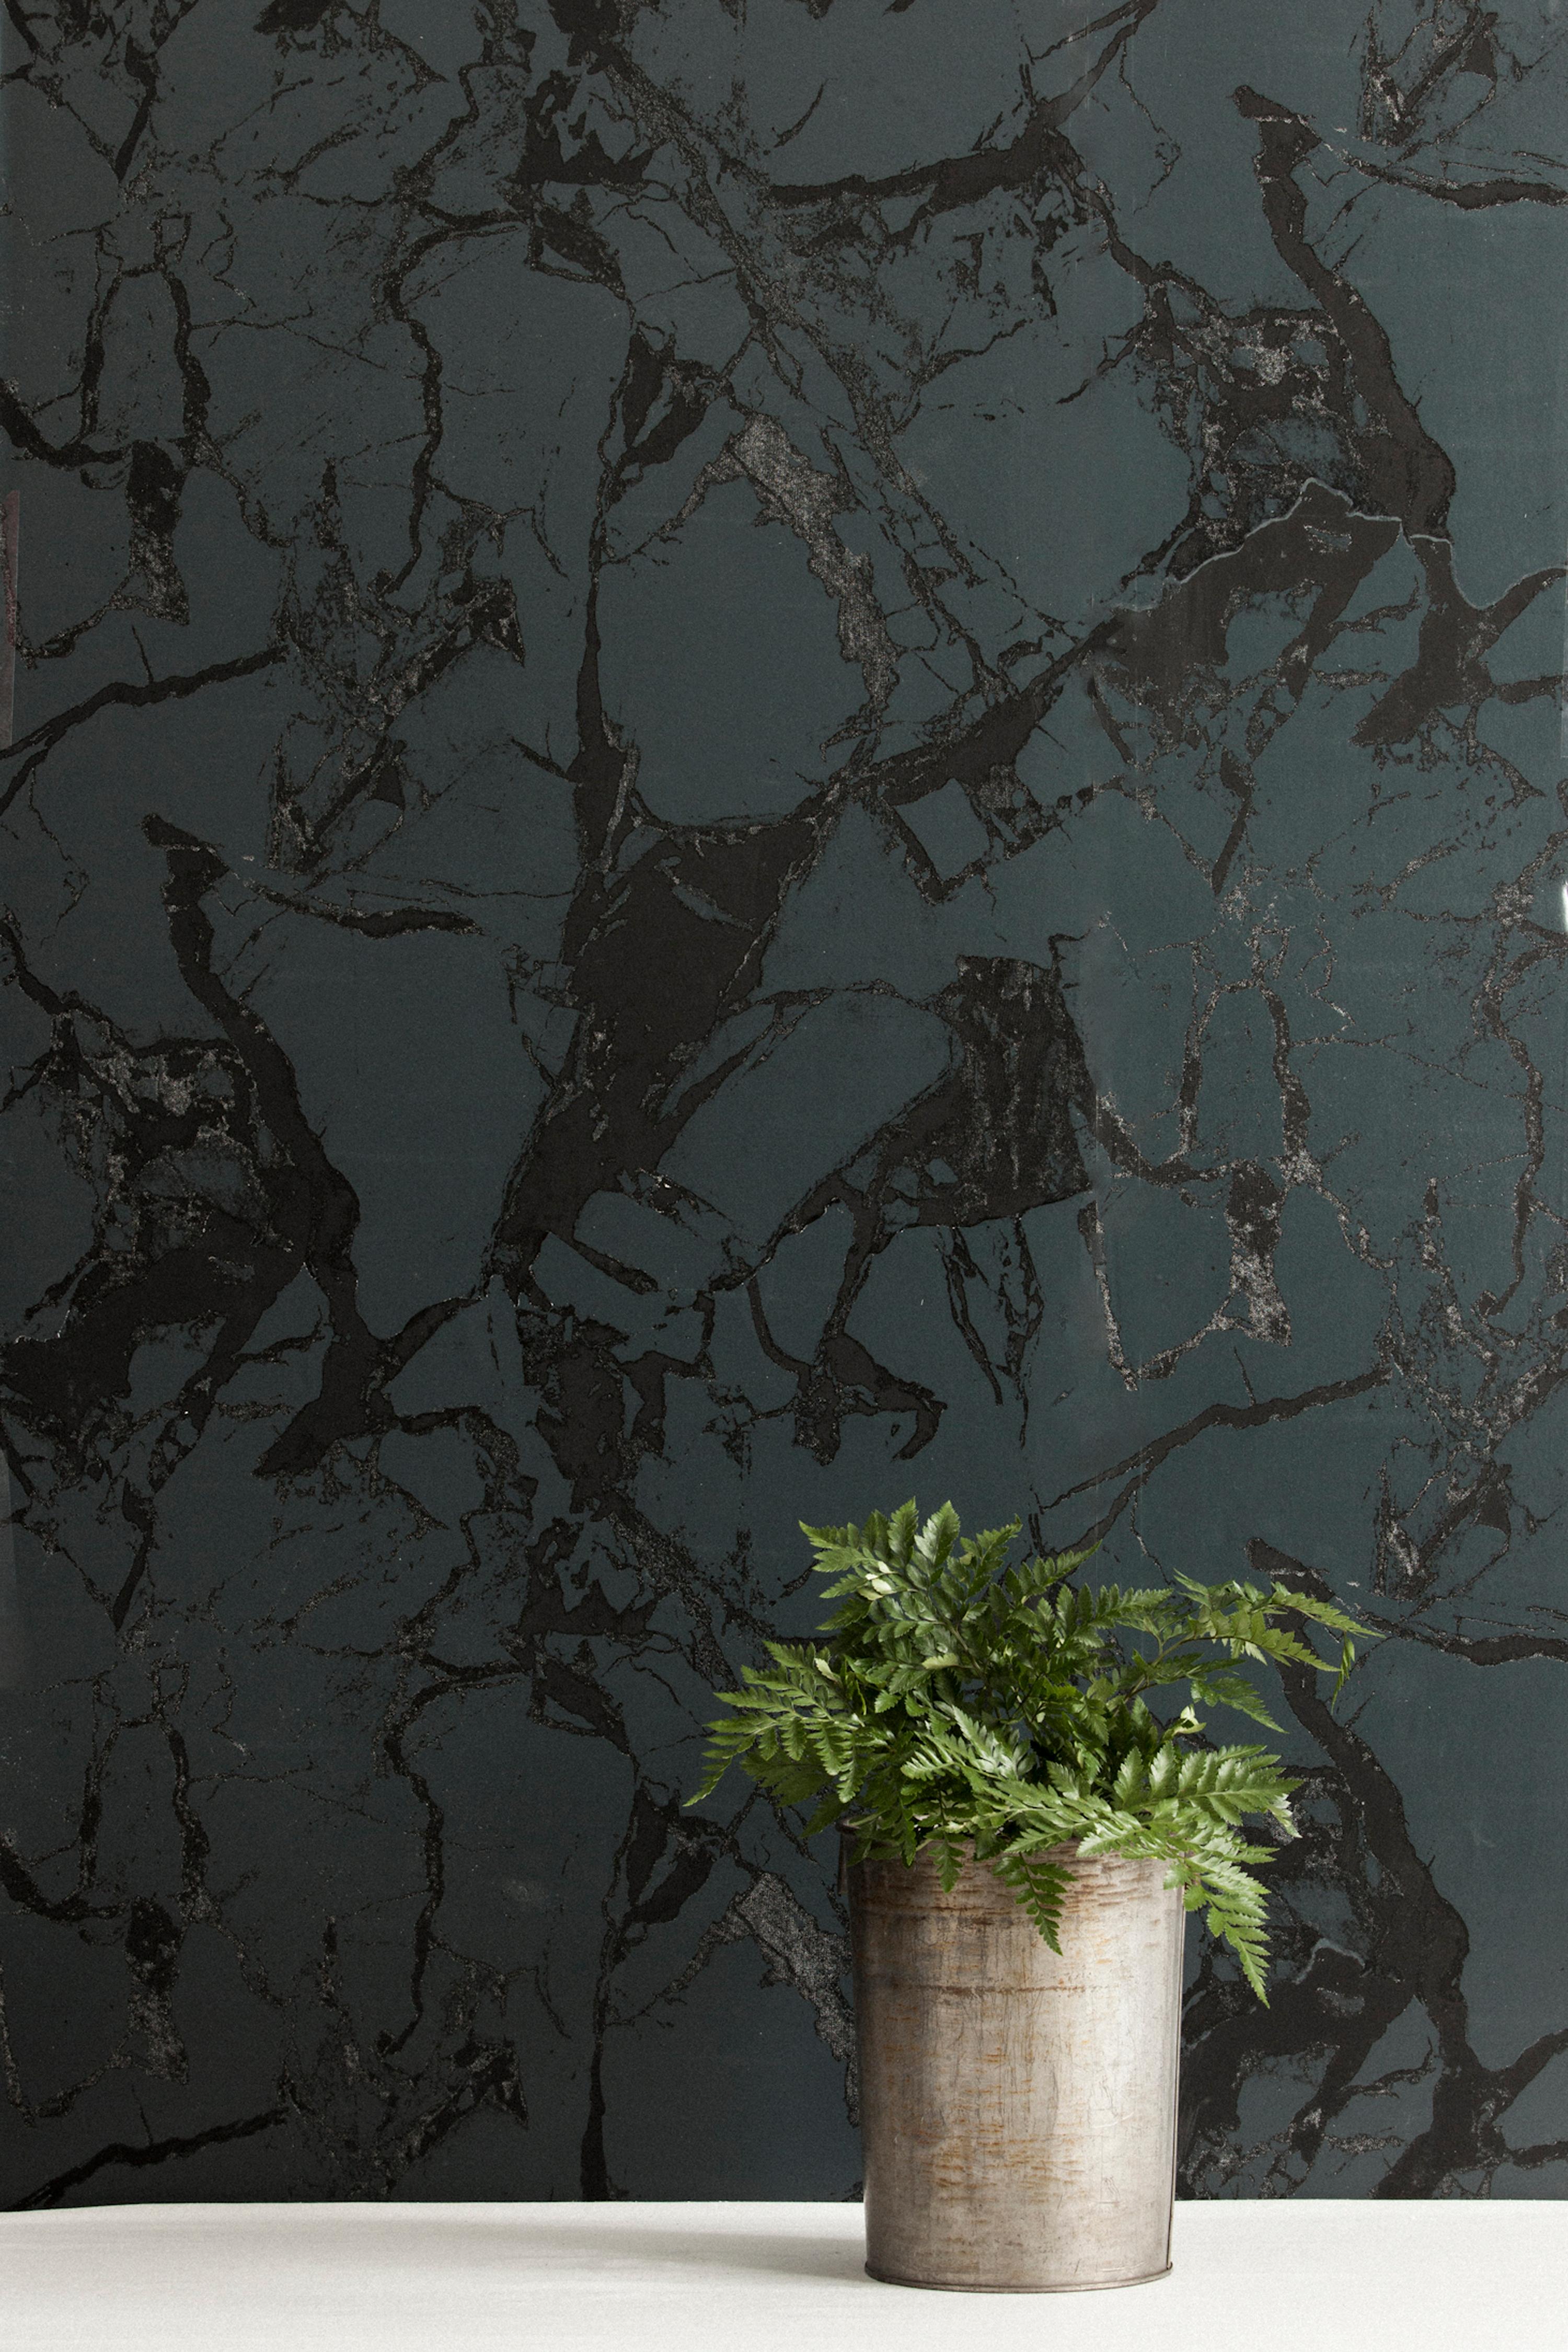 Nero is a luxurious hand printed wallpaper featuring dark gray and subtle black inks that create a tonal marble effect pattern. It is also washable, strippable, unpasted, and class A fire rated. Type II & contract wallpaper is also available. Made